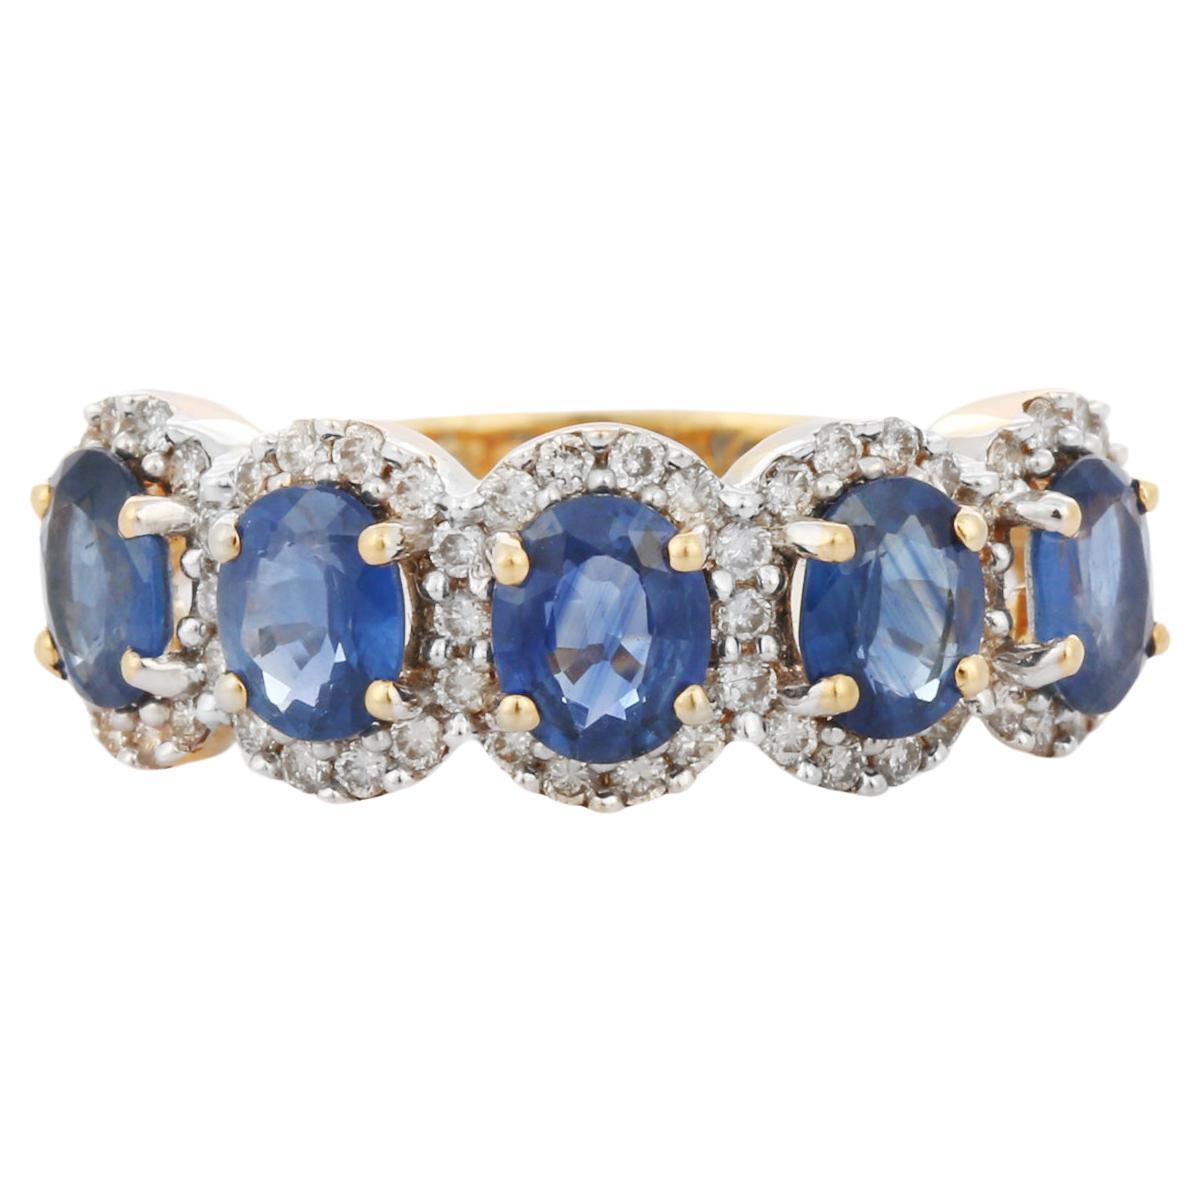 For Sale:  18K Yellow Gold Half Engagement Band with Sapphires Amidst in Diamonds